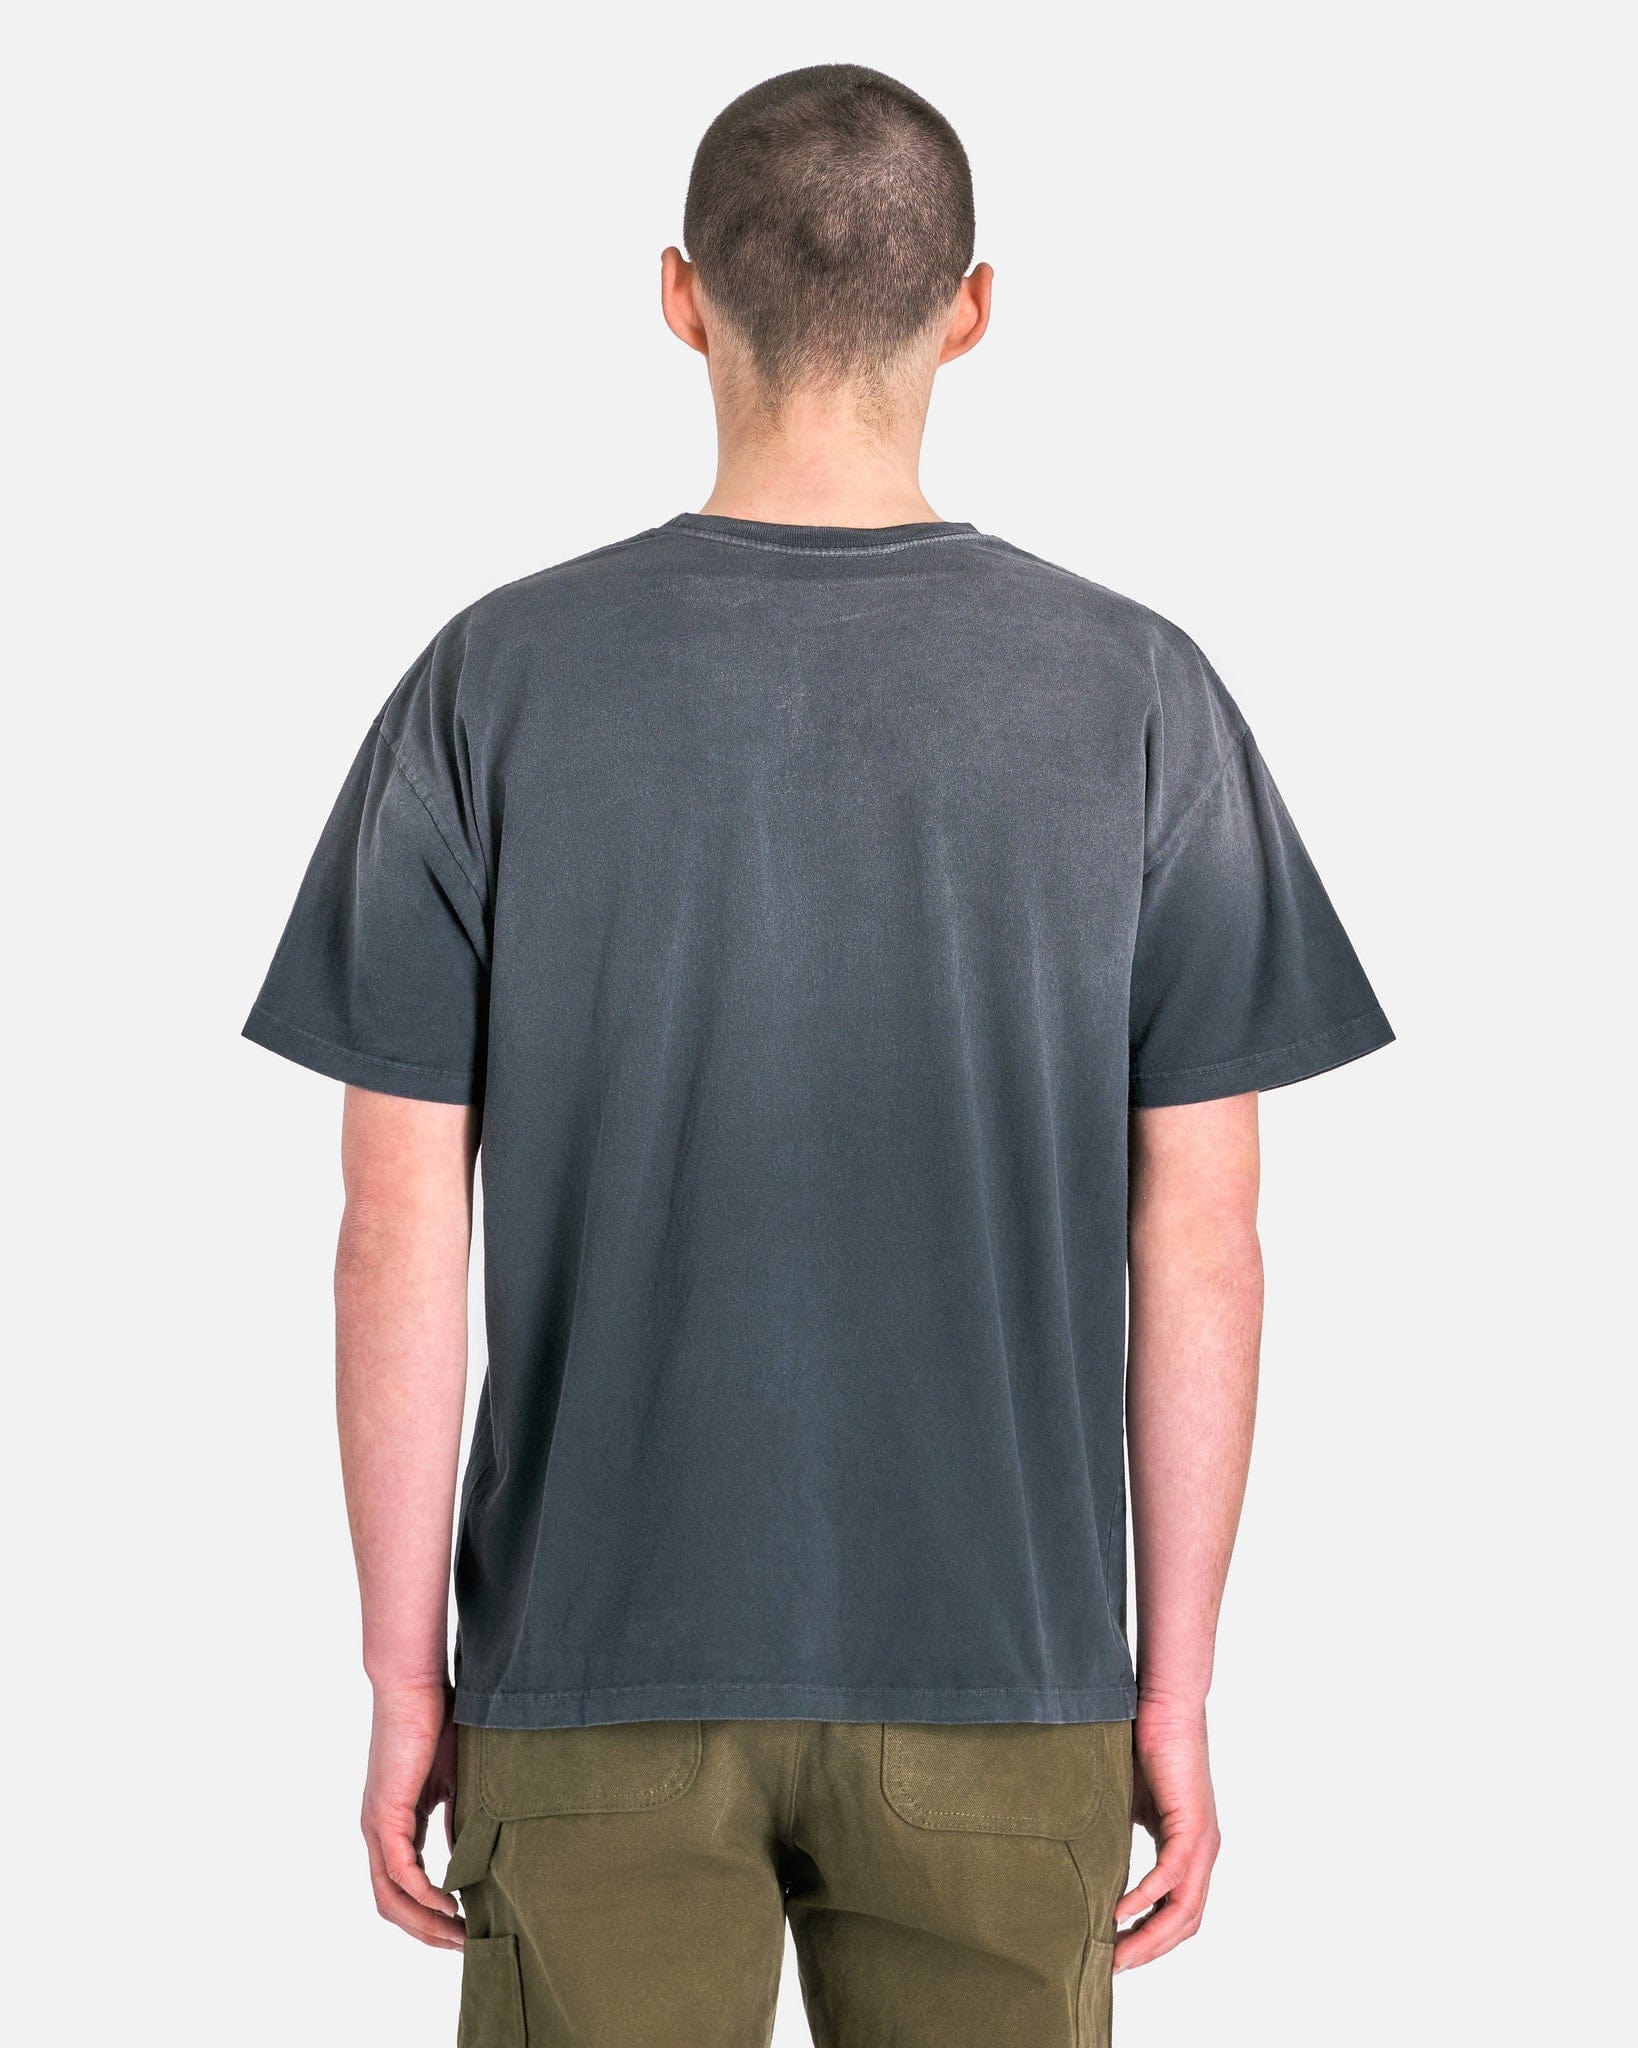 One of These Days Men's T-Shirts Burning Landscape Tee in Washed Black